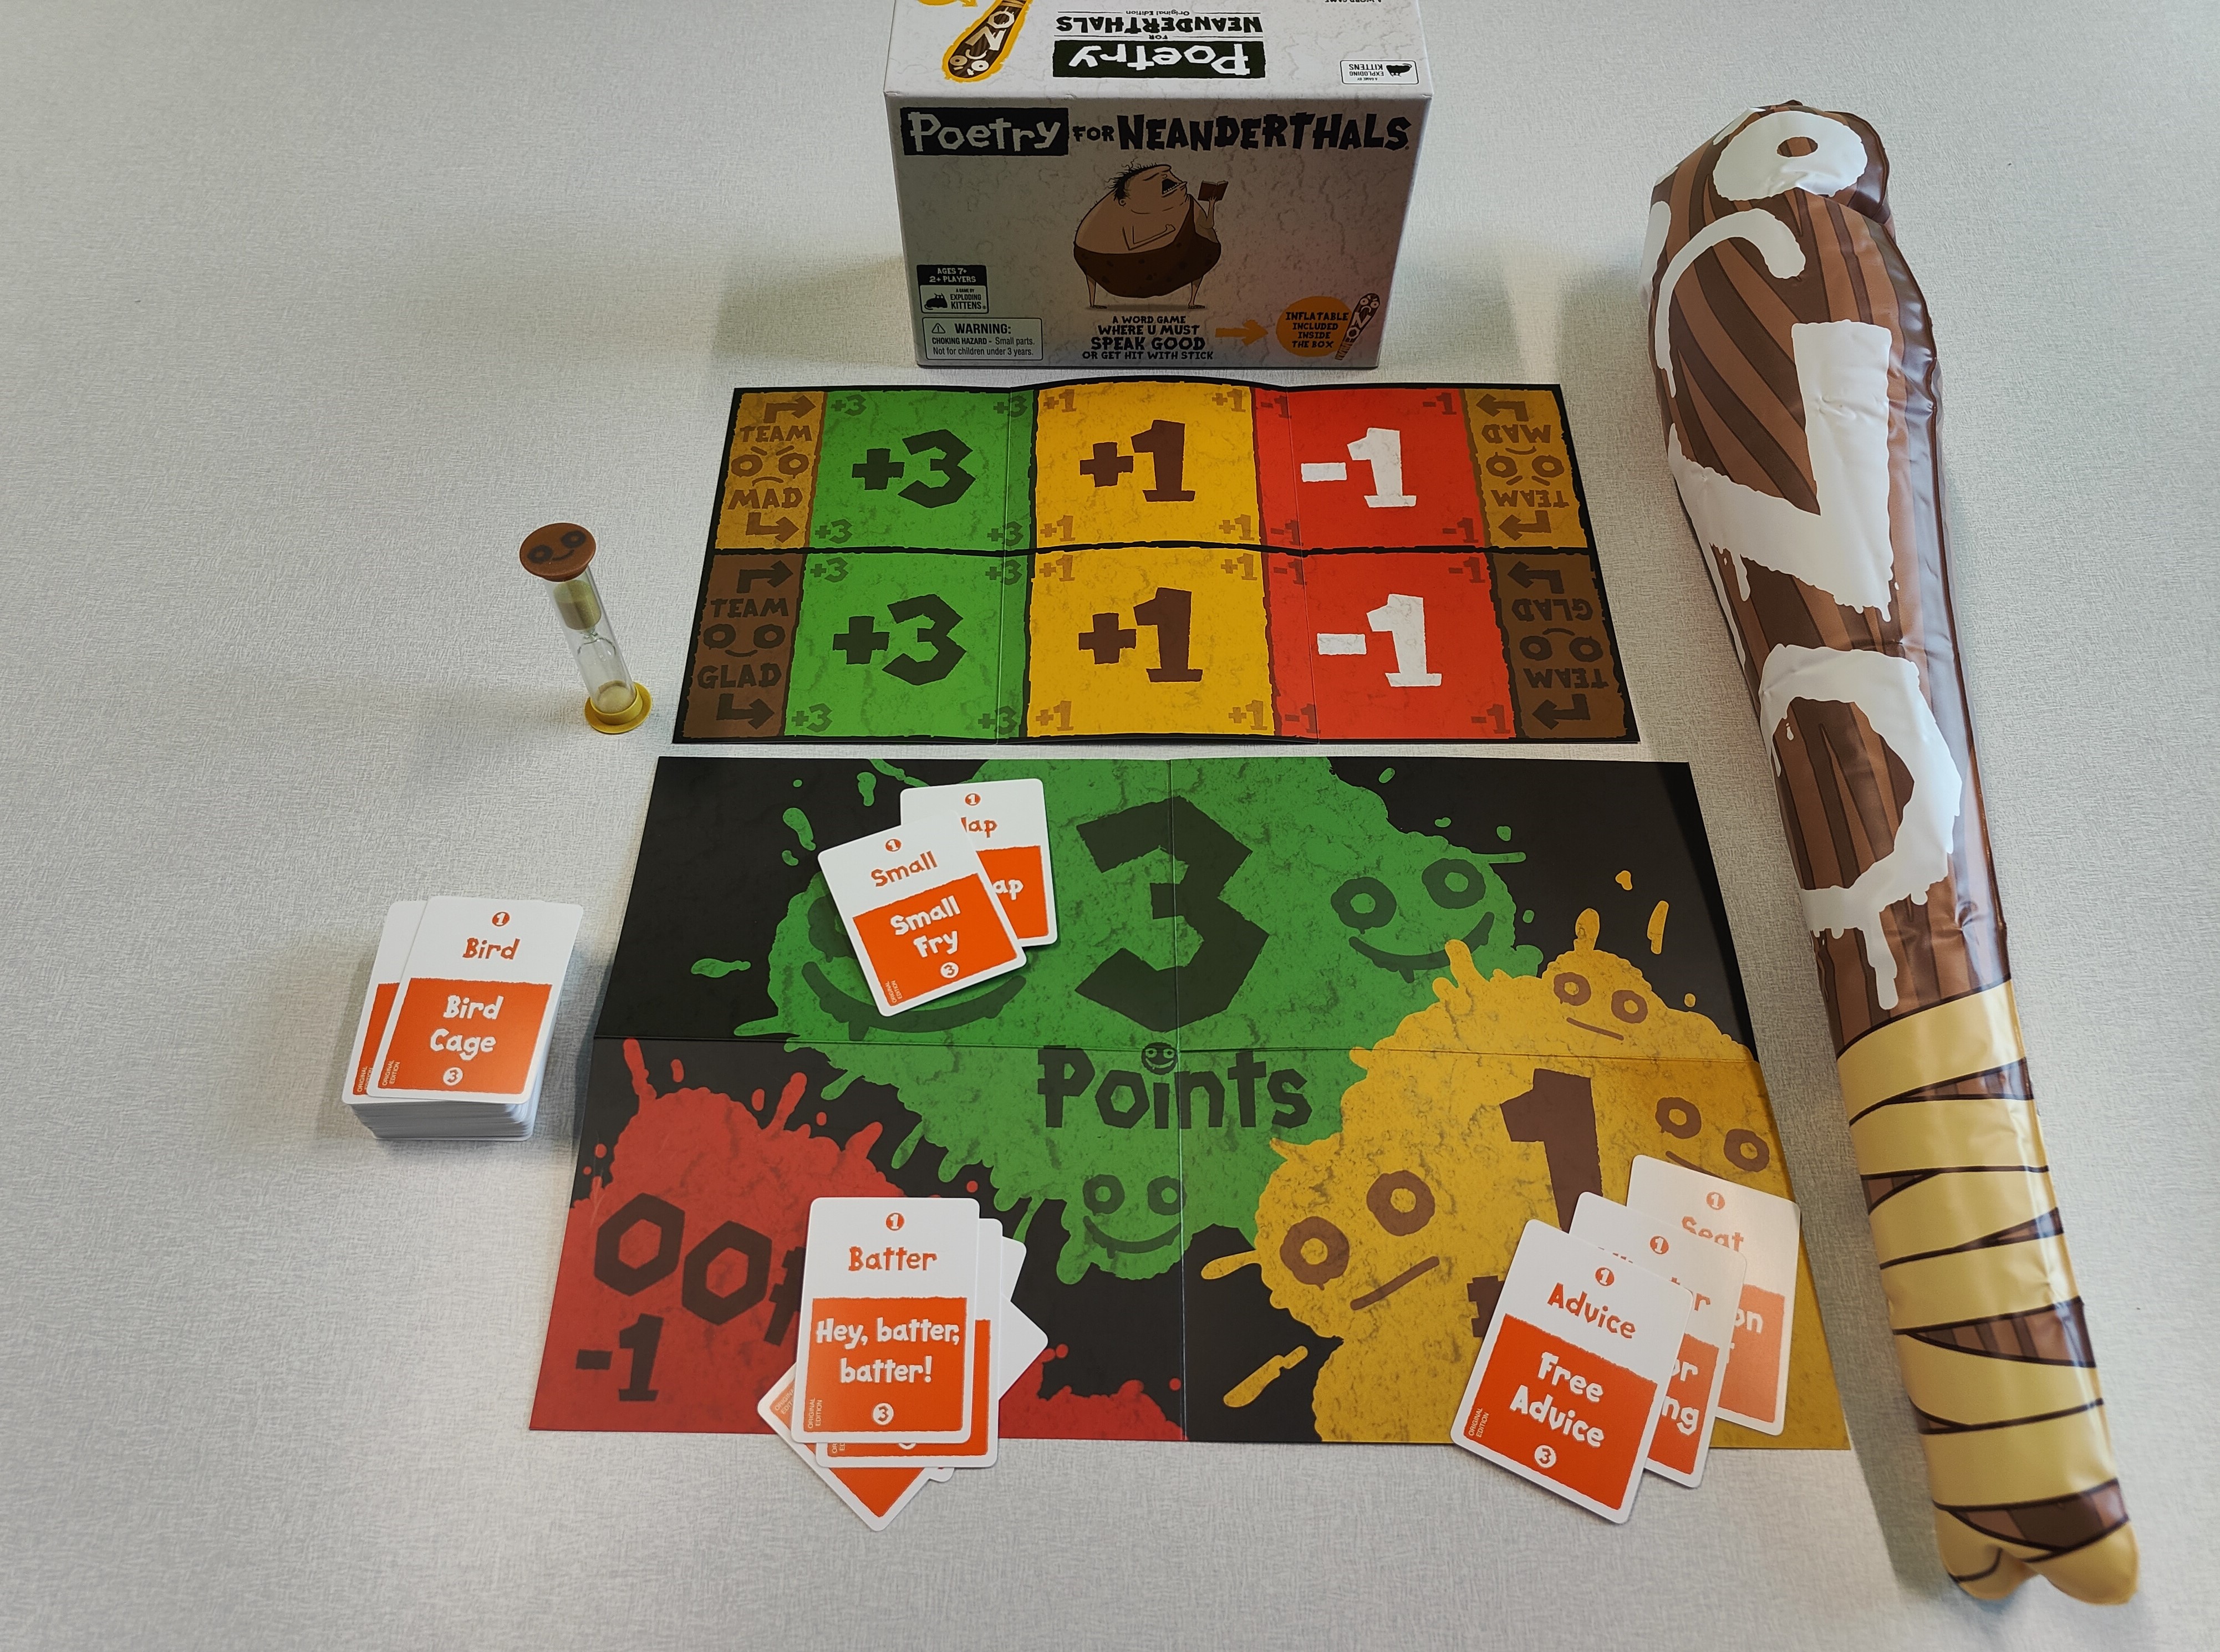 Poetry for Neanderthals box, 2 game mats, sand timer, stack of cards, and inflatable "NO" bat